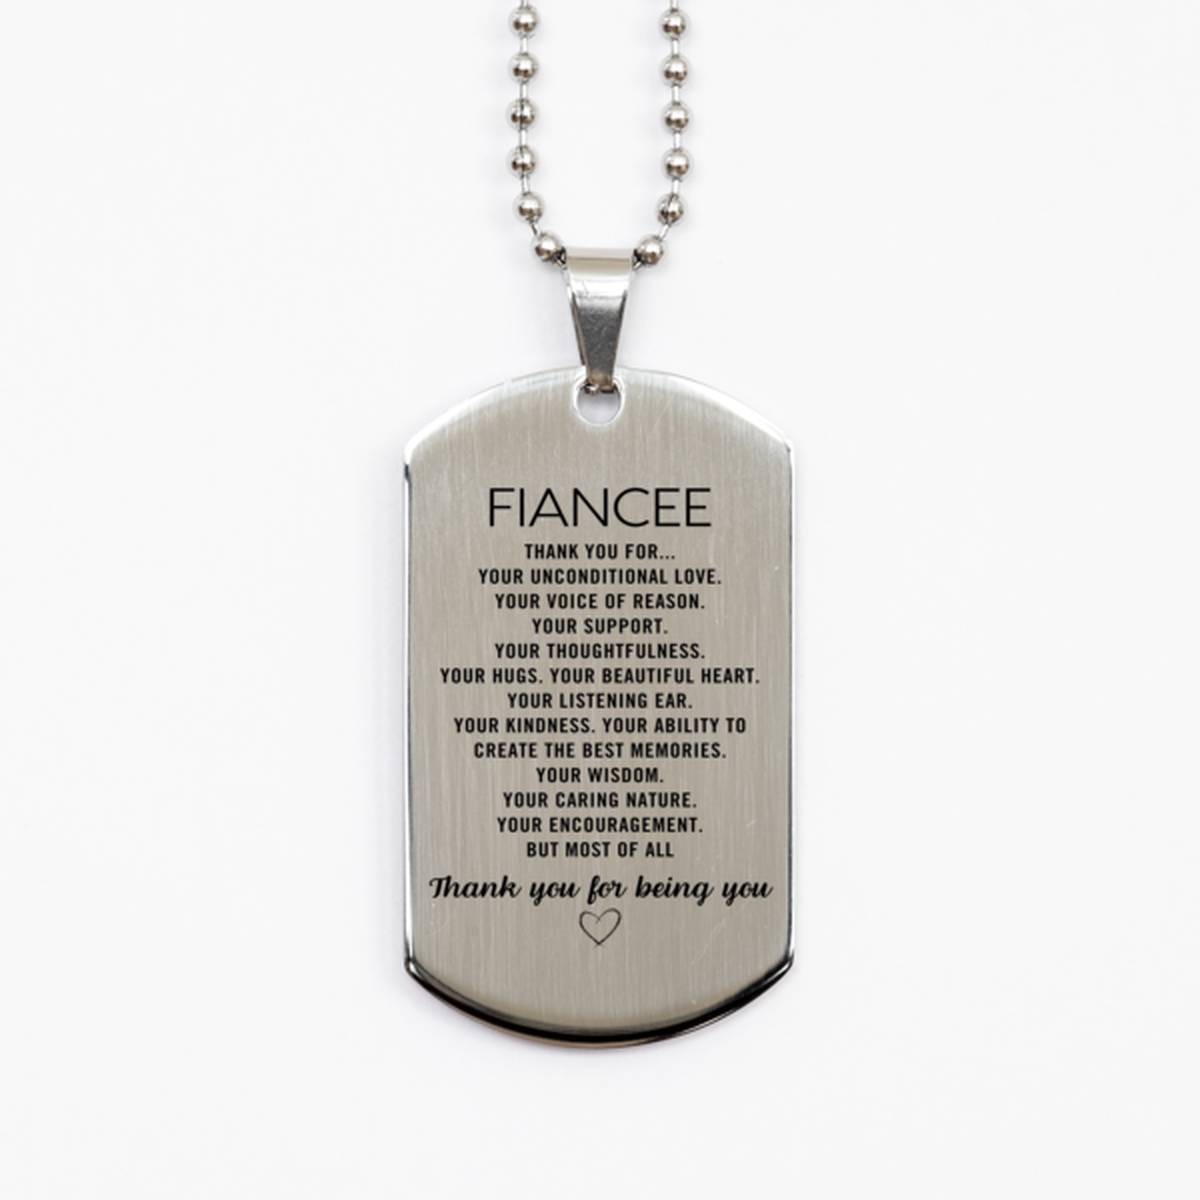 Fiancee Silver Dog Tag Custom, Engraved Gifts For Fiancee Christmas Graduation Birthday Gifts for Men Women Fiancee Thank you for Your unconditional love